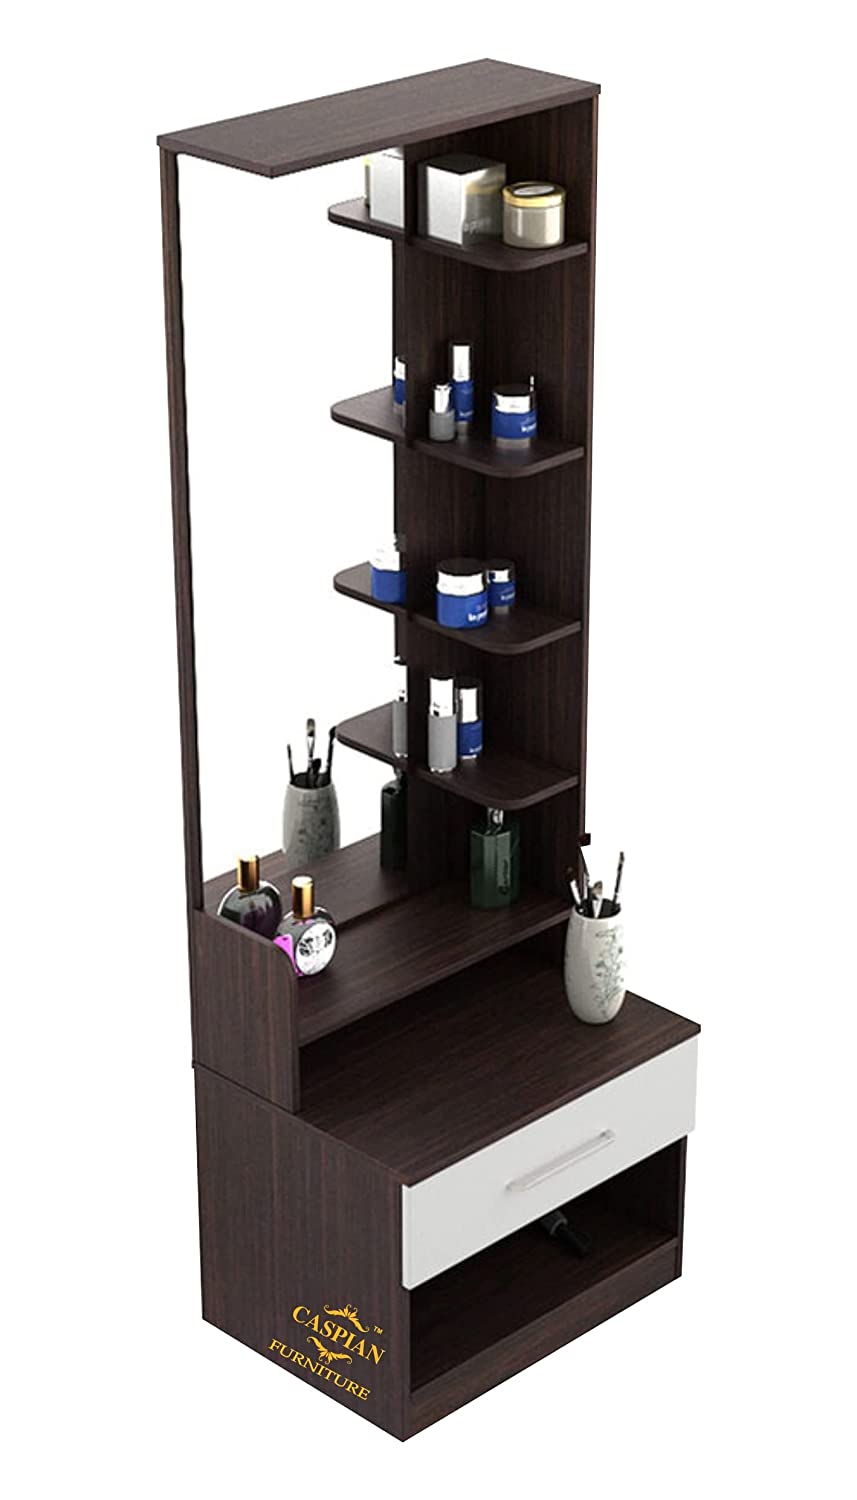 Dressing Table with Shelves and Drawer || Make up Table|| Organizer for Room Engineered Wood Dressing Table (Coffee Black & White)